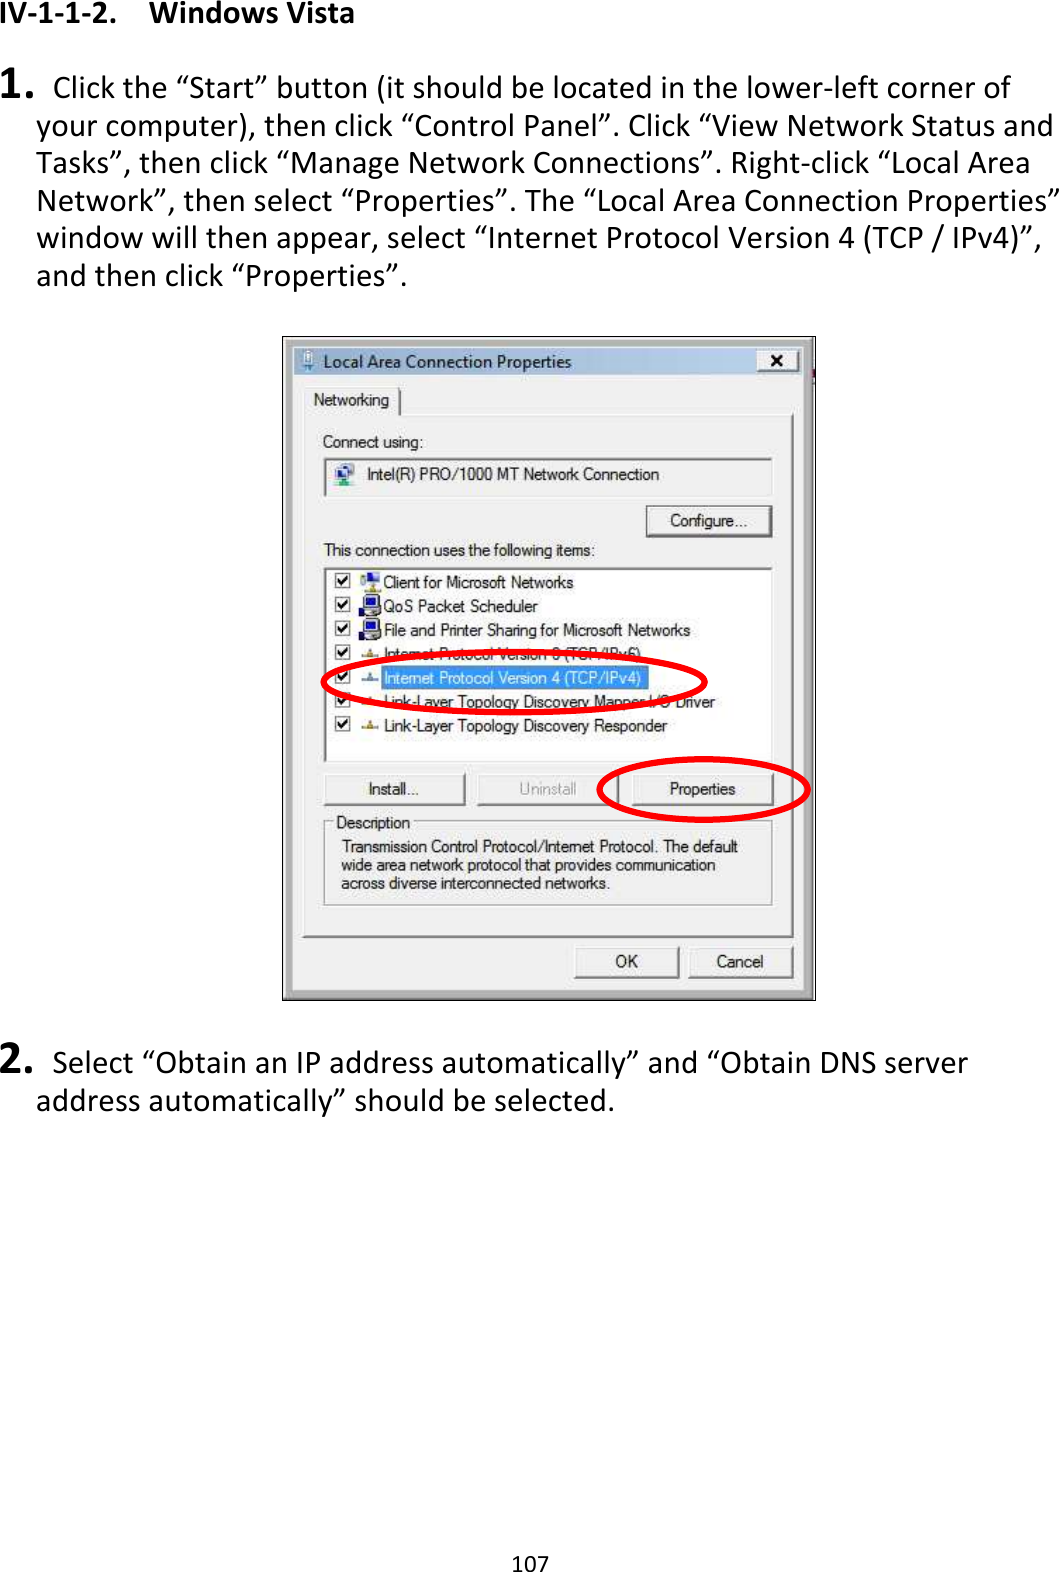 107 IV-1-1-2.  Windows Vista  1.   Click the “Start” button (it should be located in the lower-left corner of your computer), then click “Control Panel”. Click “View Network Status and Tasks”, then click “Manage Network Connections”. Right-click “Local Area Network”, then select “Properties”. The “Local Area Connection Properties” window will then appear, select “Internet Protocol Version 4 (TCP / IPv4)”, and then click “Properties”.    2.   Select “Obtain an IP address automatically” and “Obtain DNS server address automatically” should be selected. 